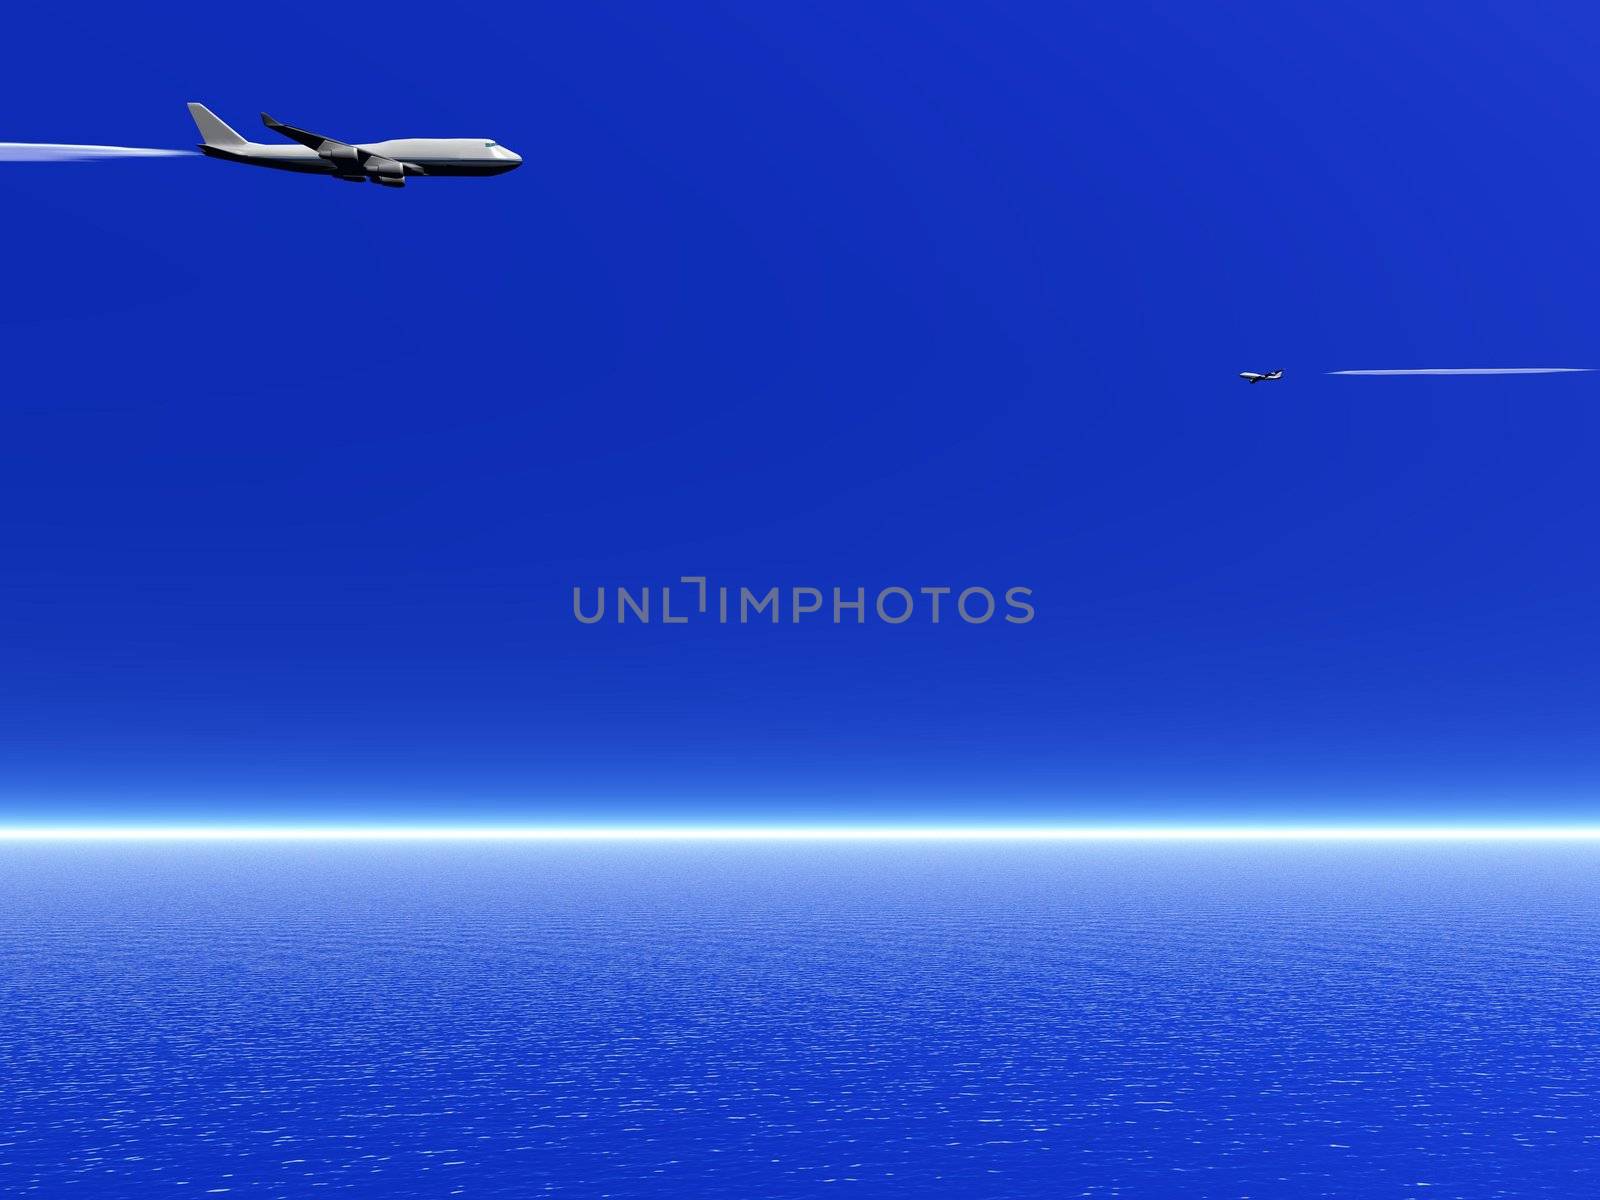 Two airplanes flying in the deep blue sky upon the ocean